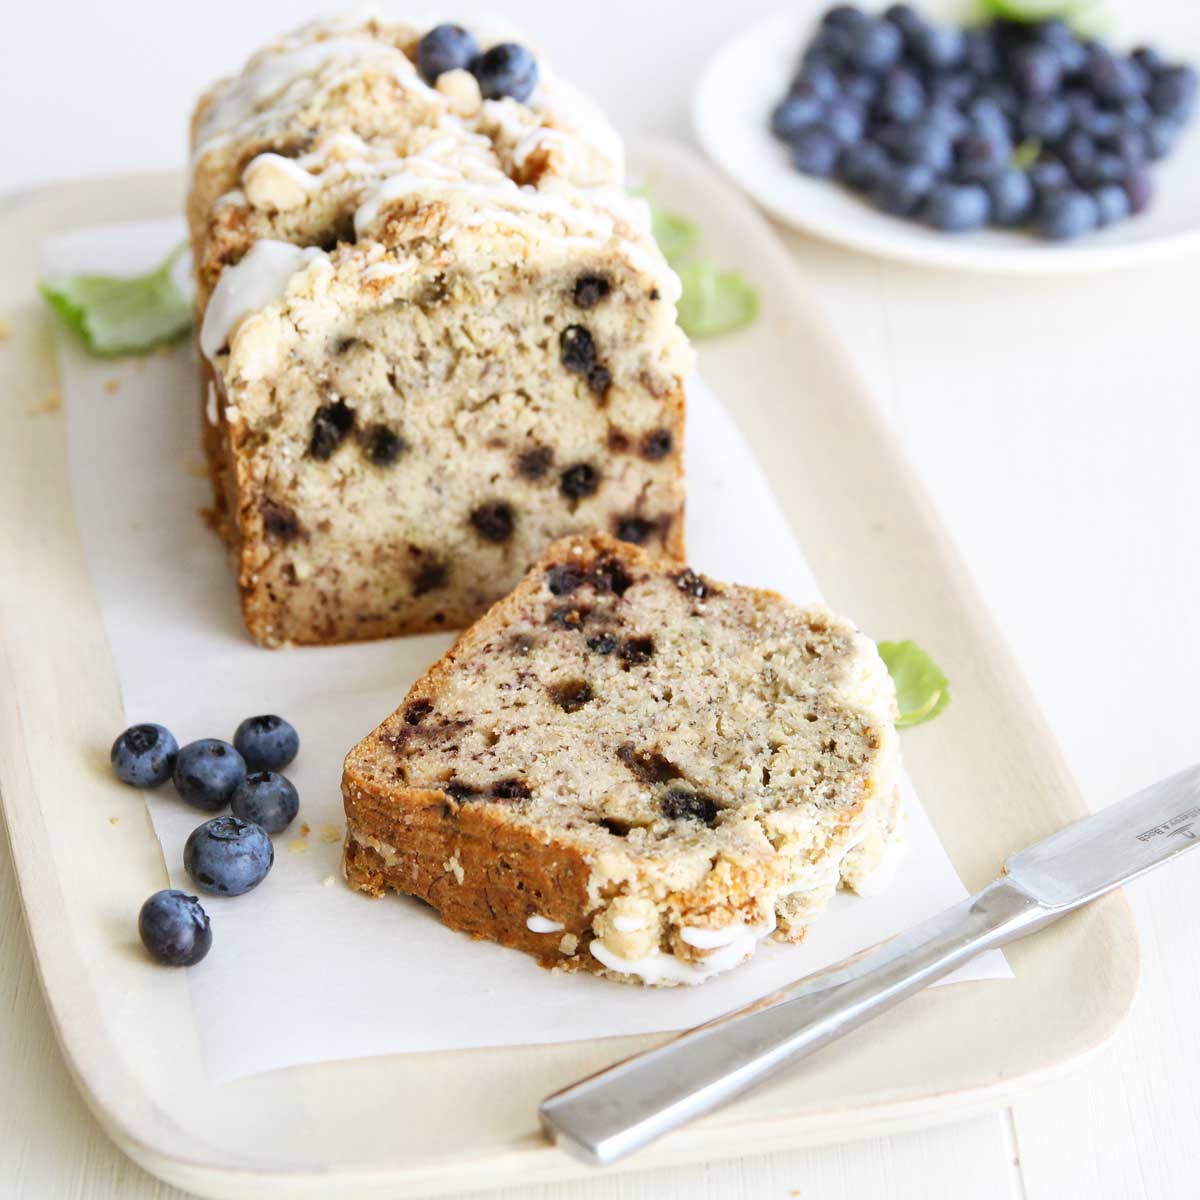 Blueberry Banana Bread with Oats & Streusel (Eggless, Dairy Free) - Blueberry Banana Bread